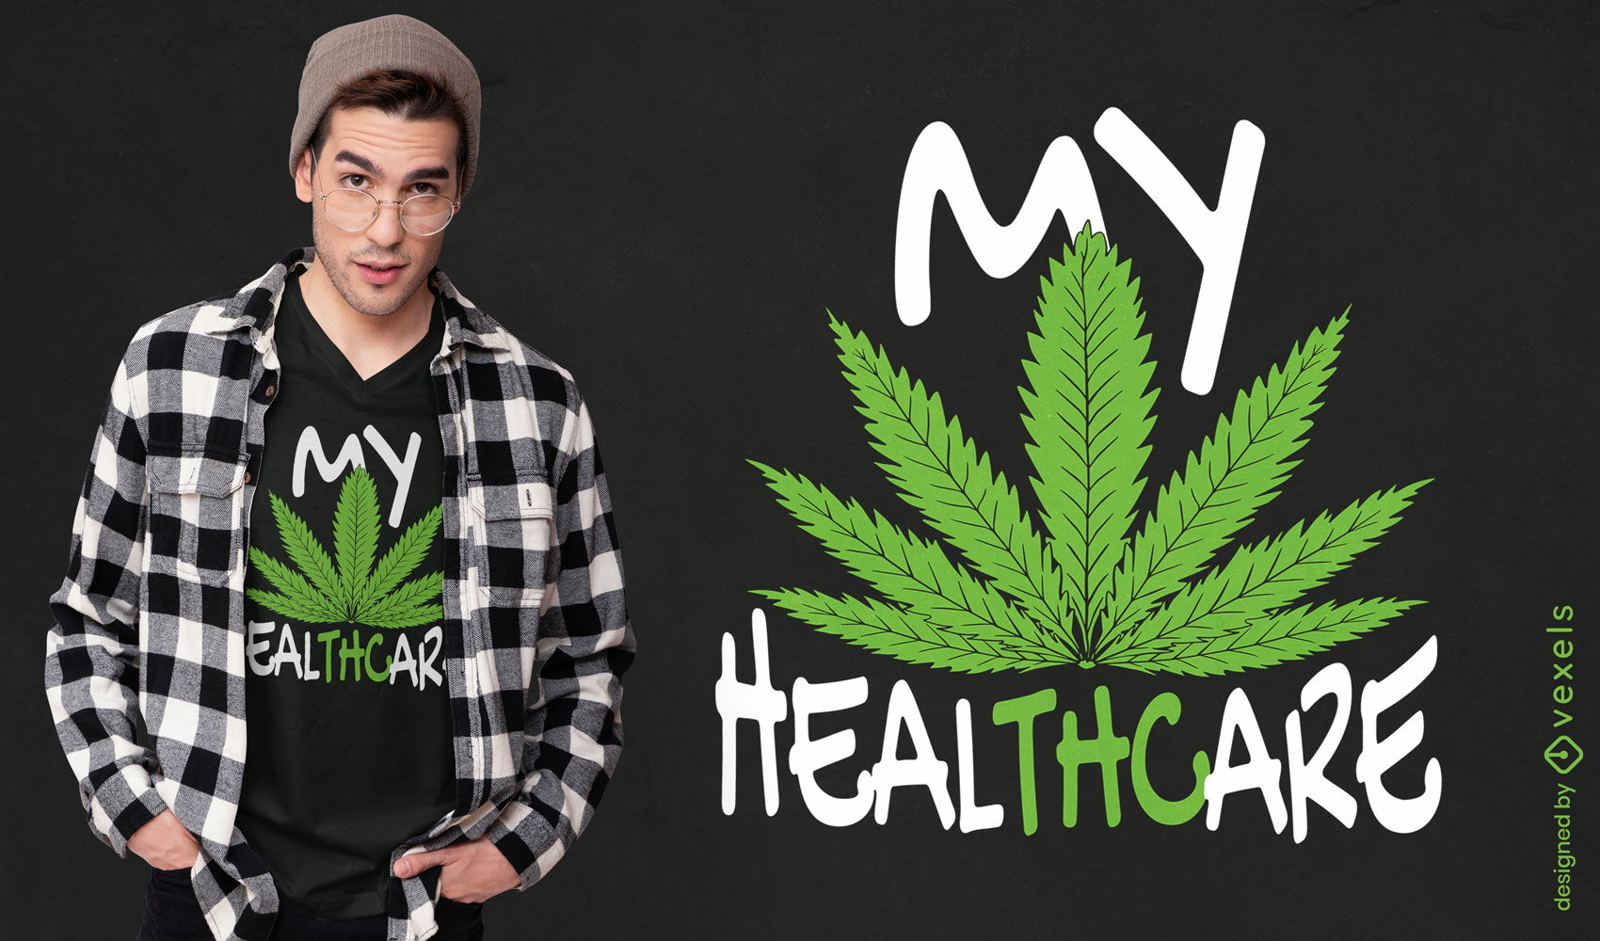 Healthcare weed t-shirt design